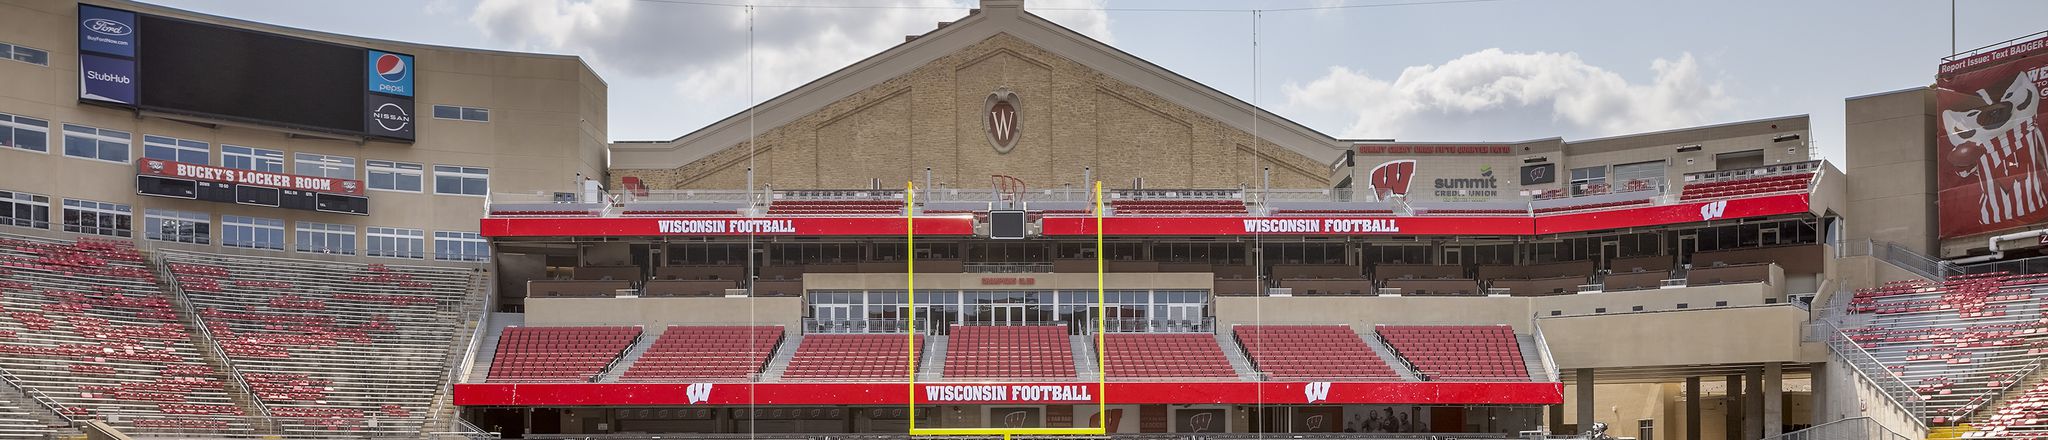 shot of camp randall's south end zone seating